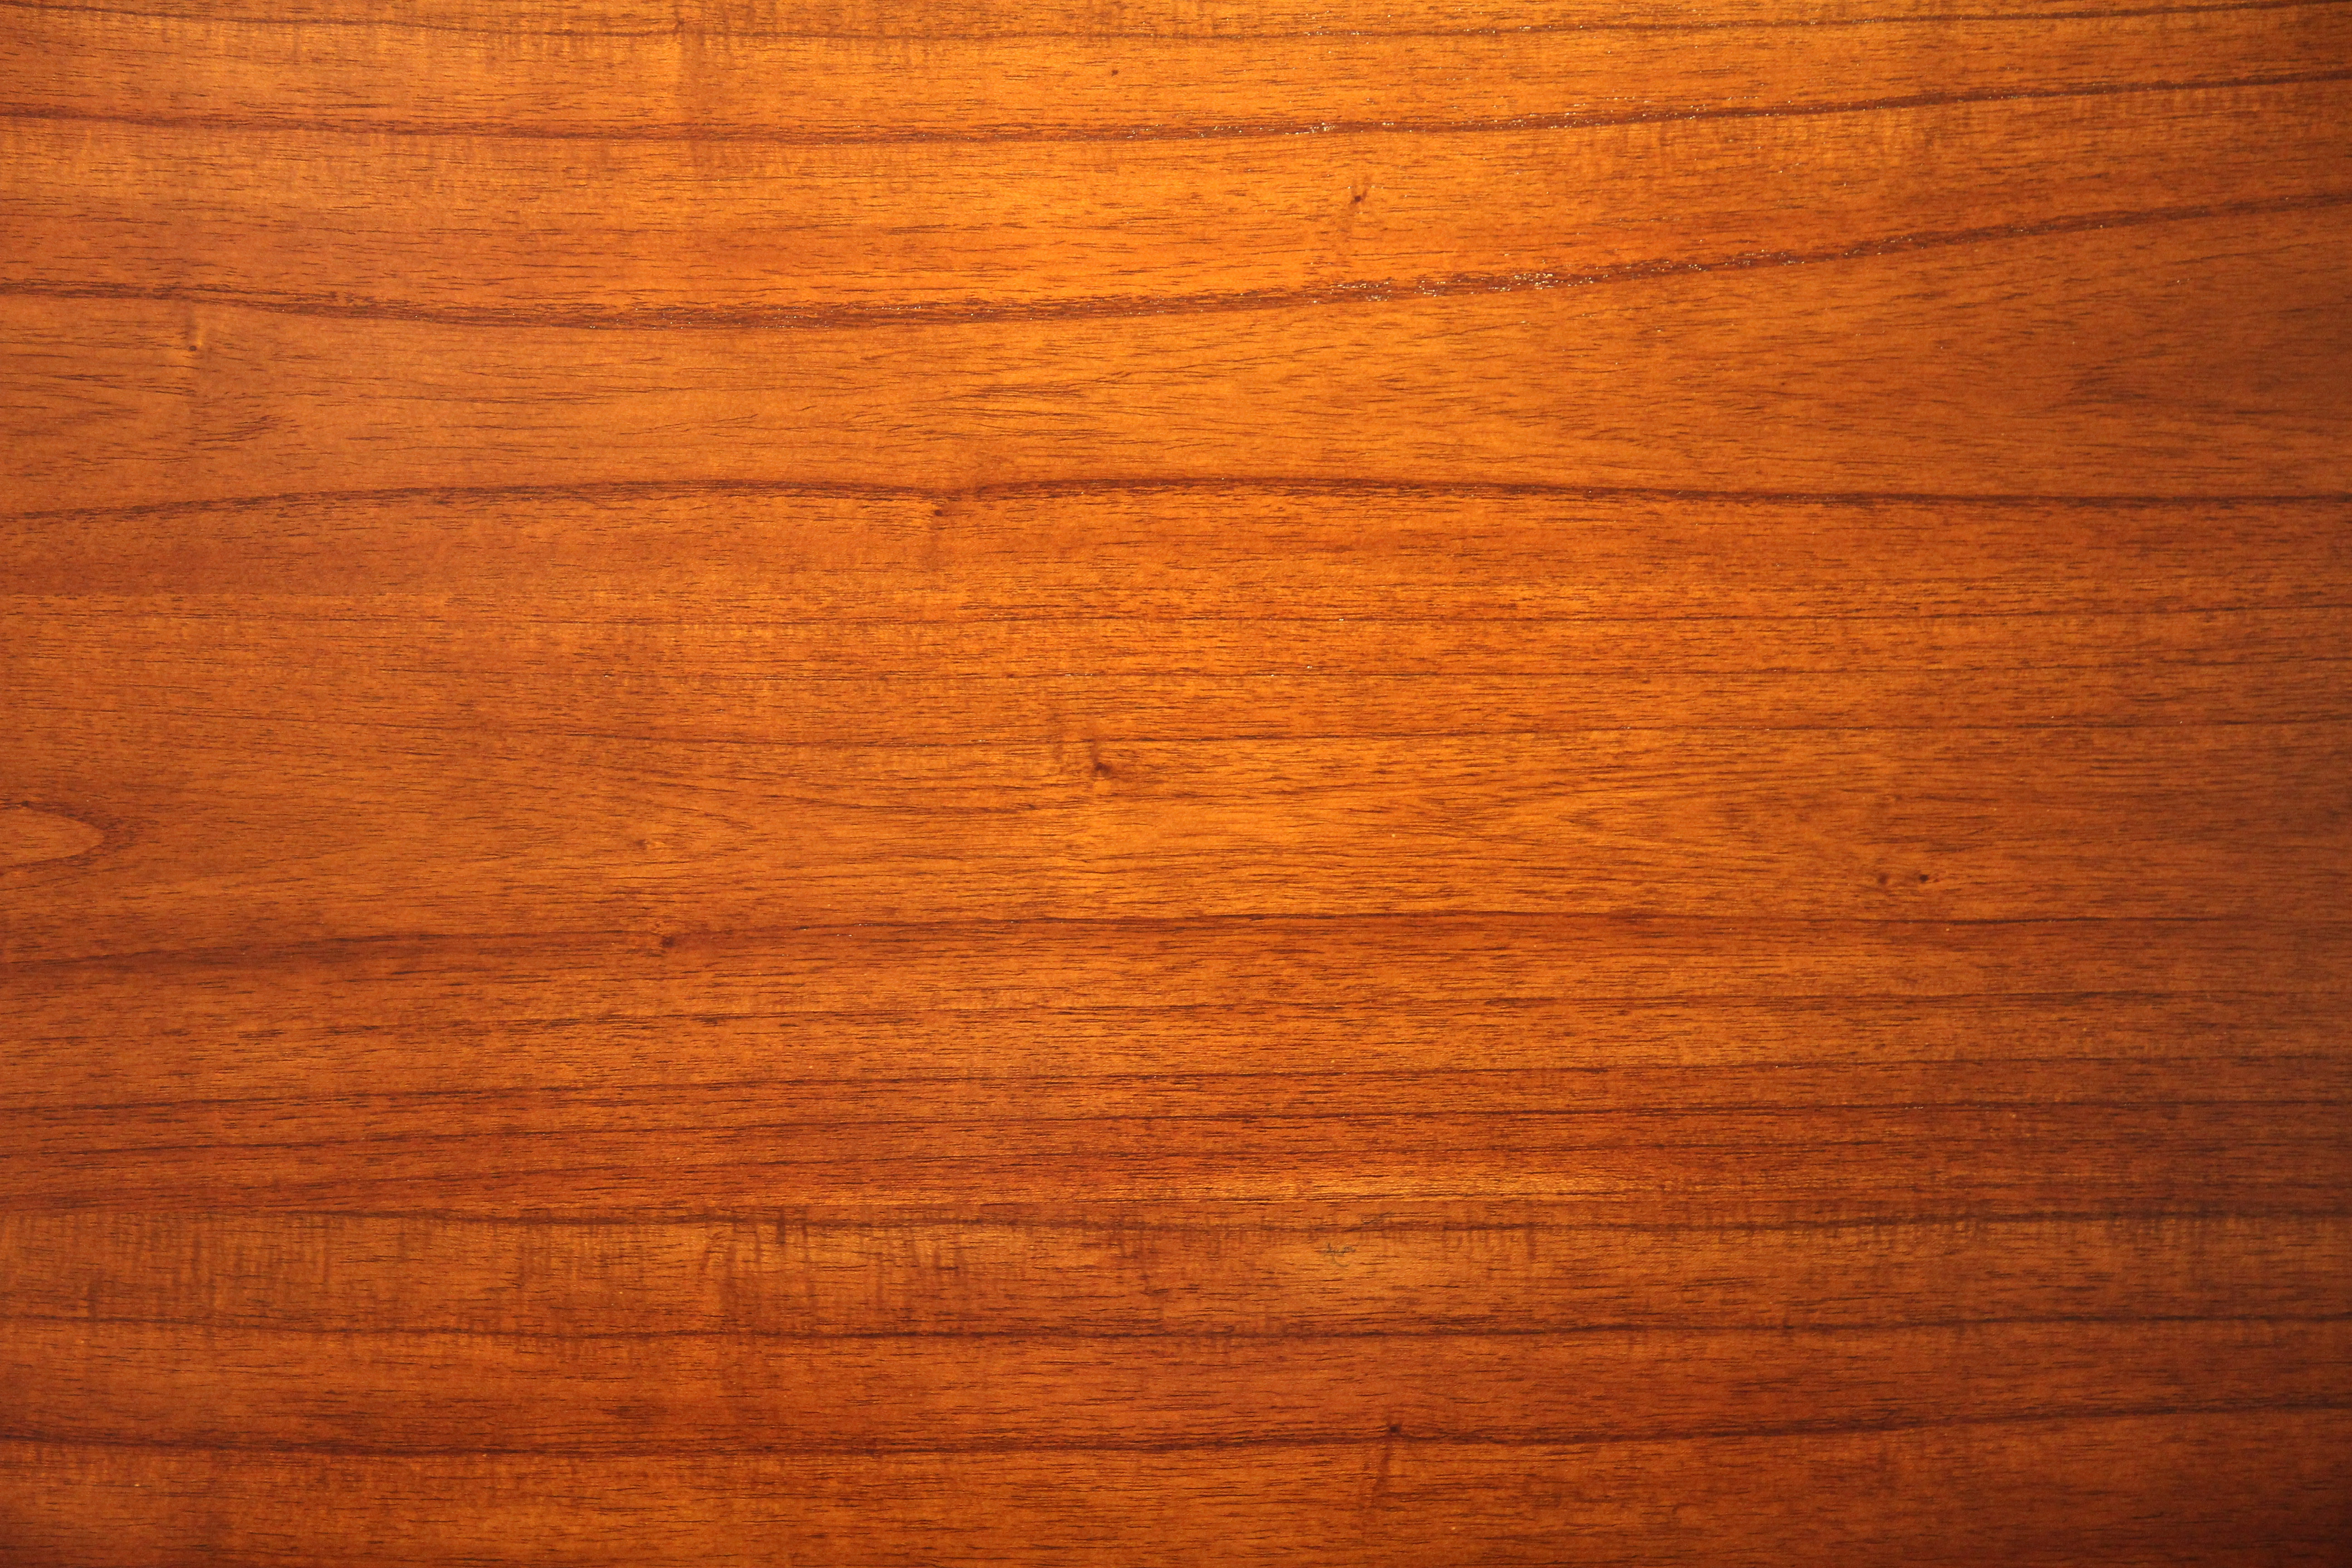 red wood texture grain natural wooden paneling surface photo ...